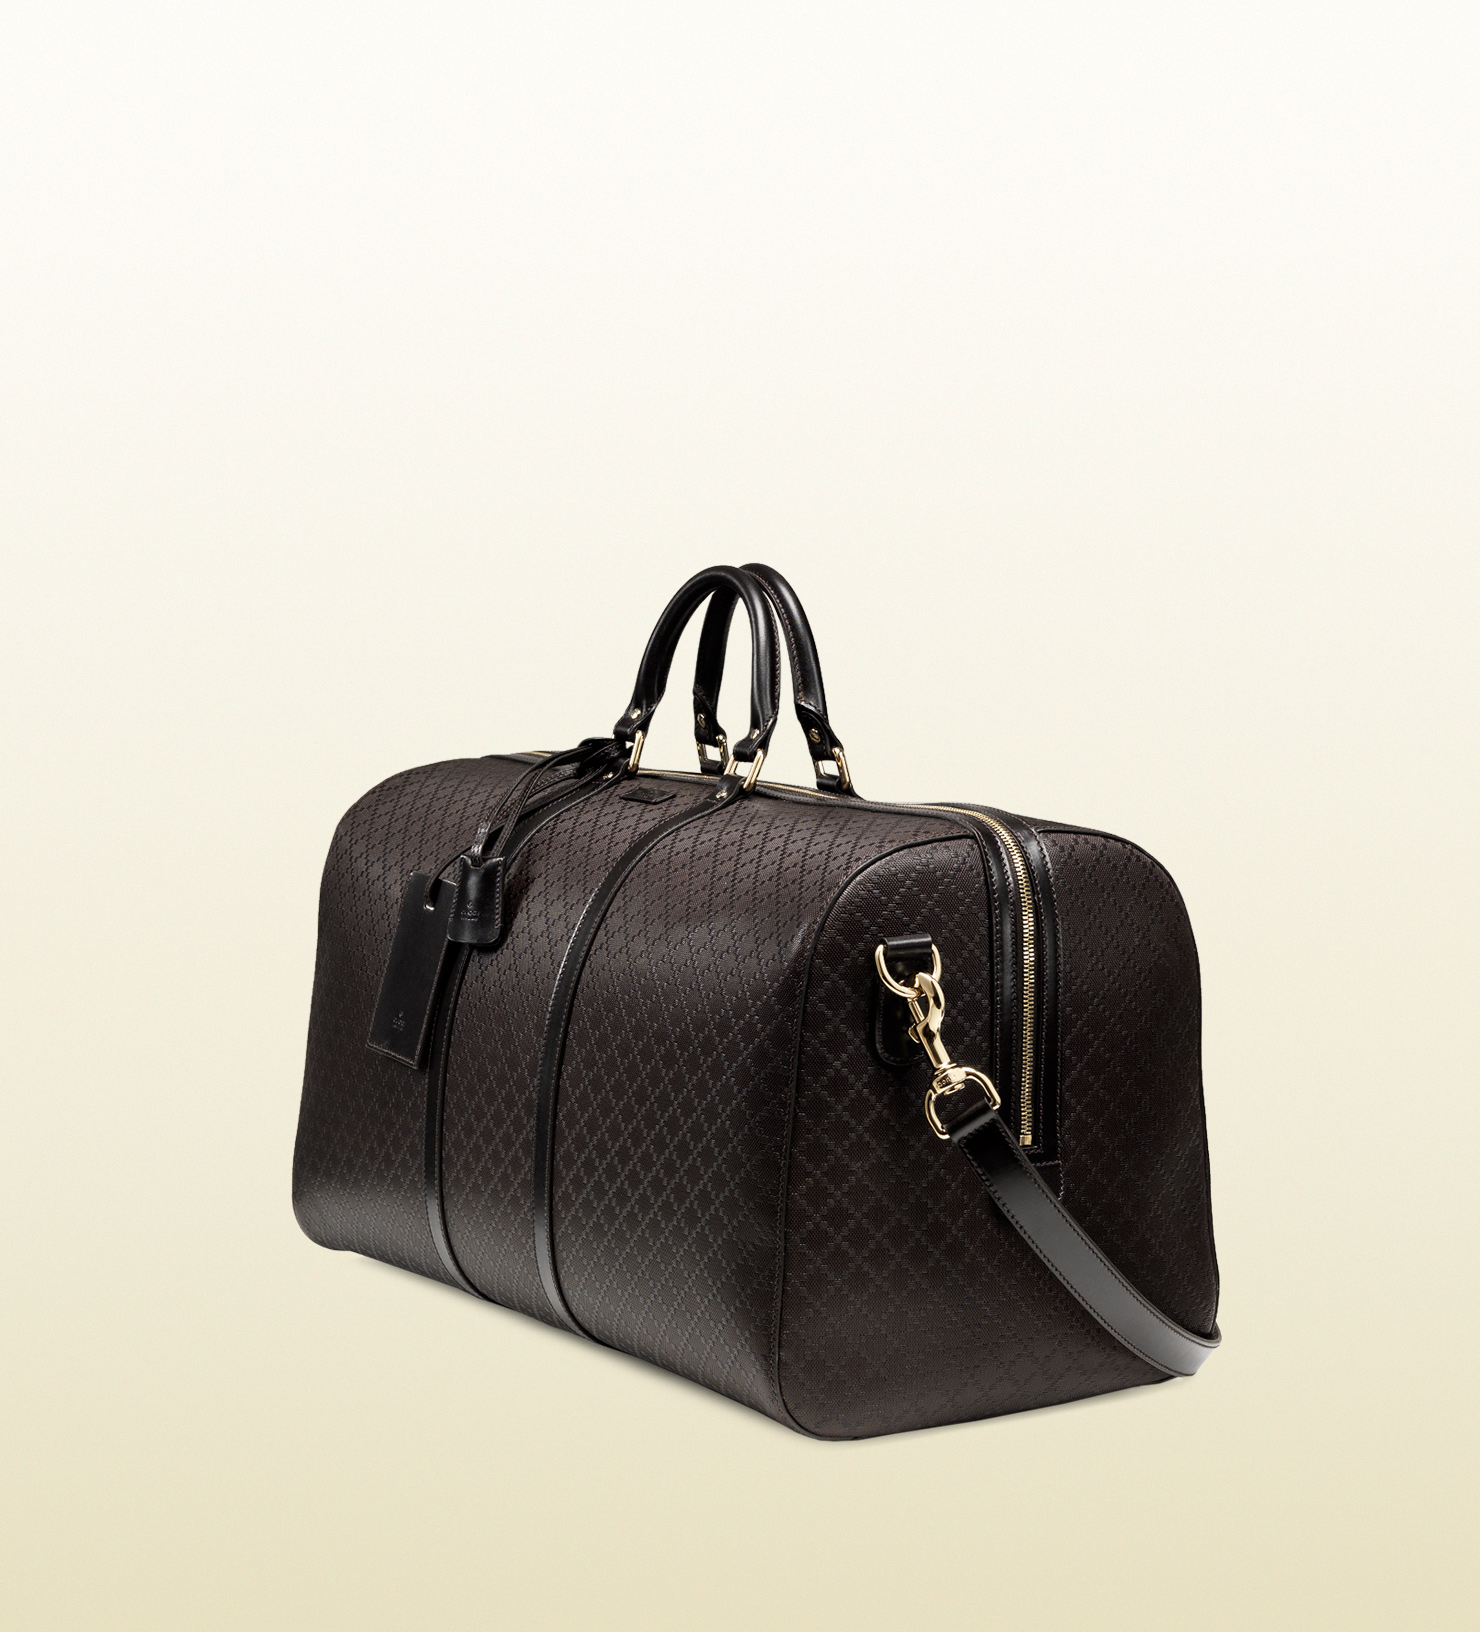 Lyst - Gucci Bright Diamante Leather Carry-on Duffle Bag in Brown for Men